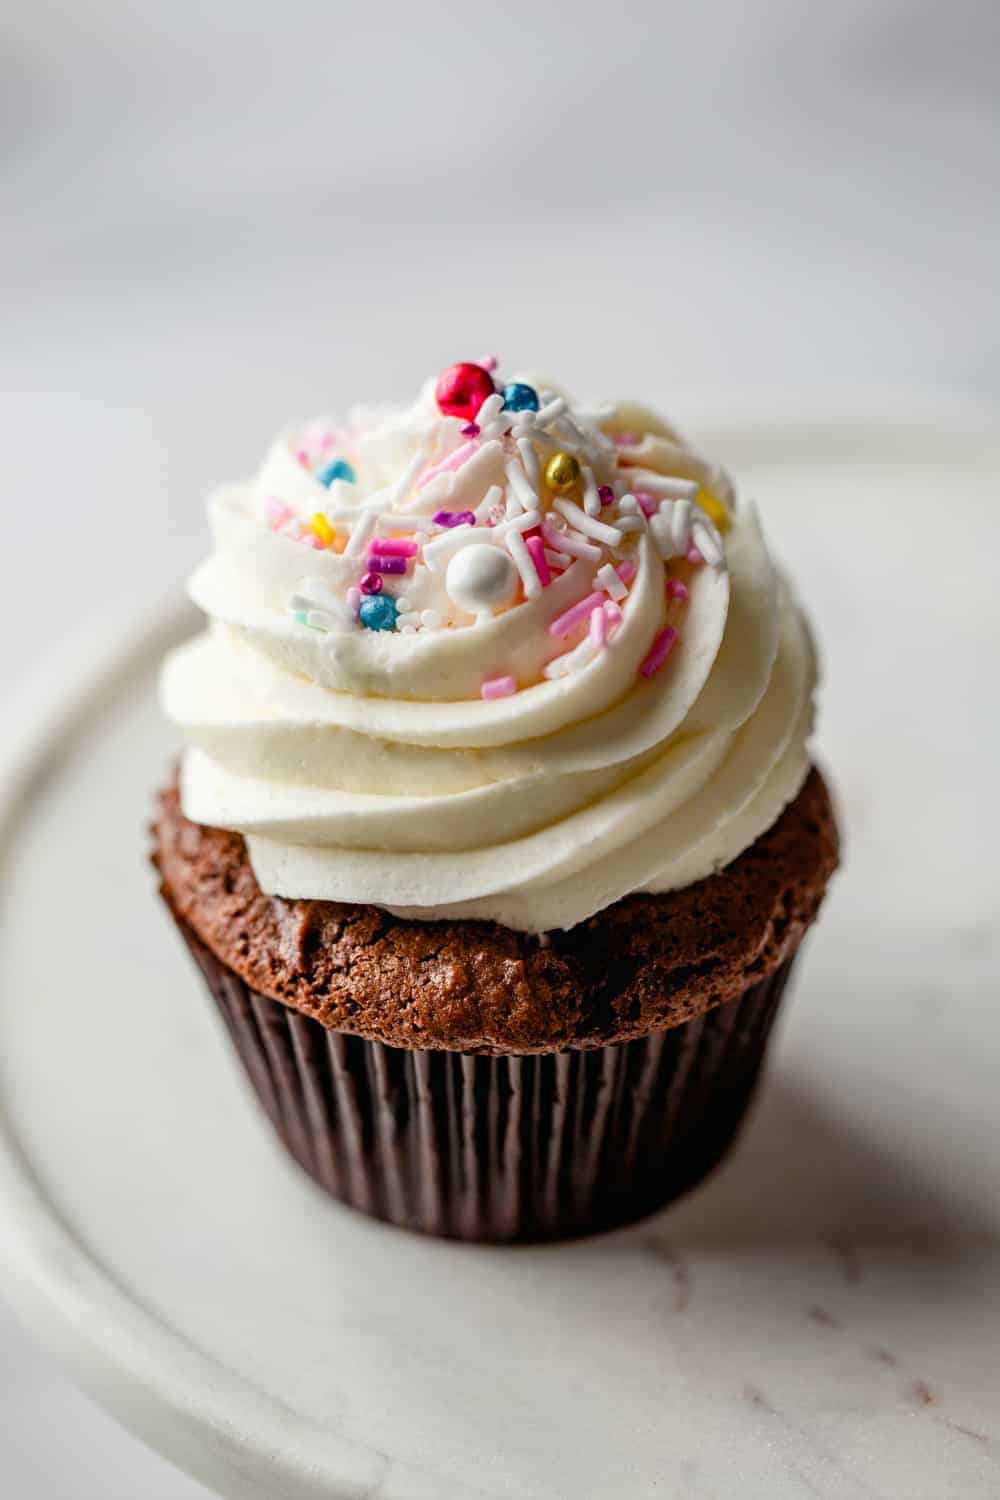 Get perfectly moist cupcakes with Doctored Cake Mix